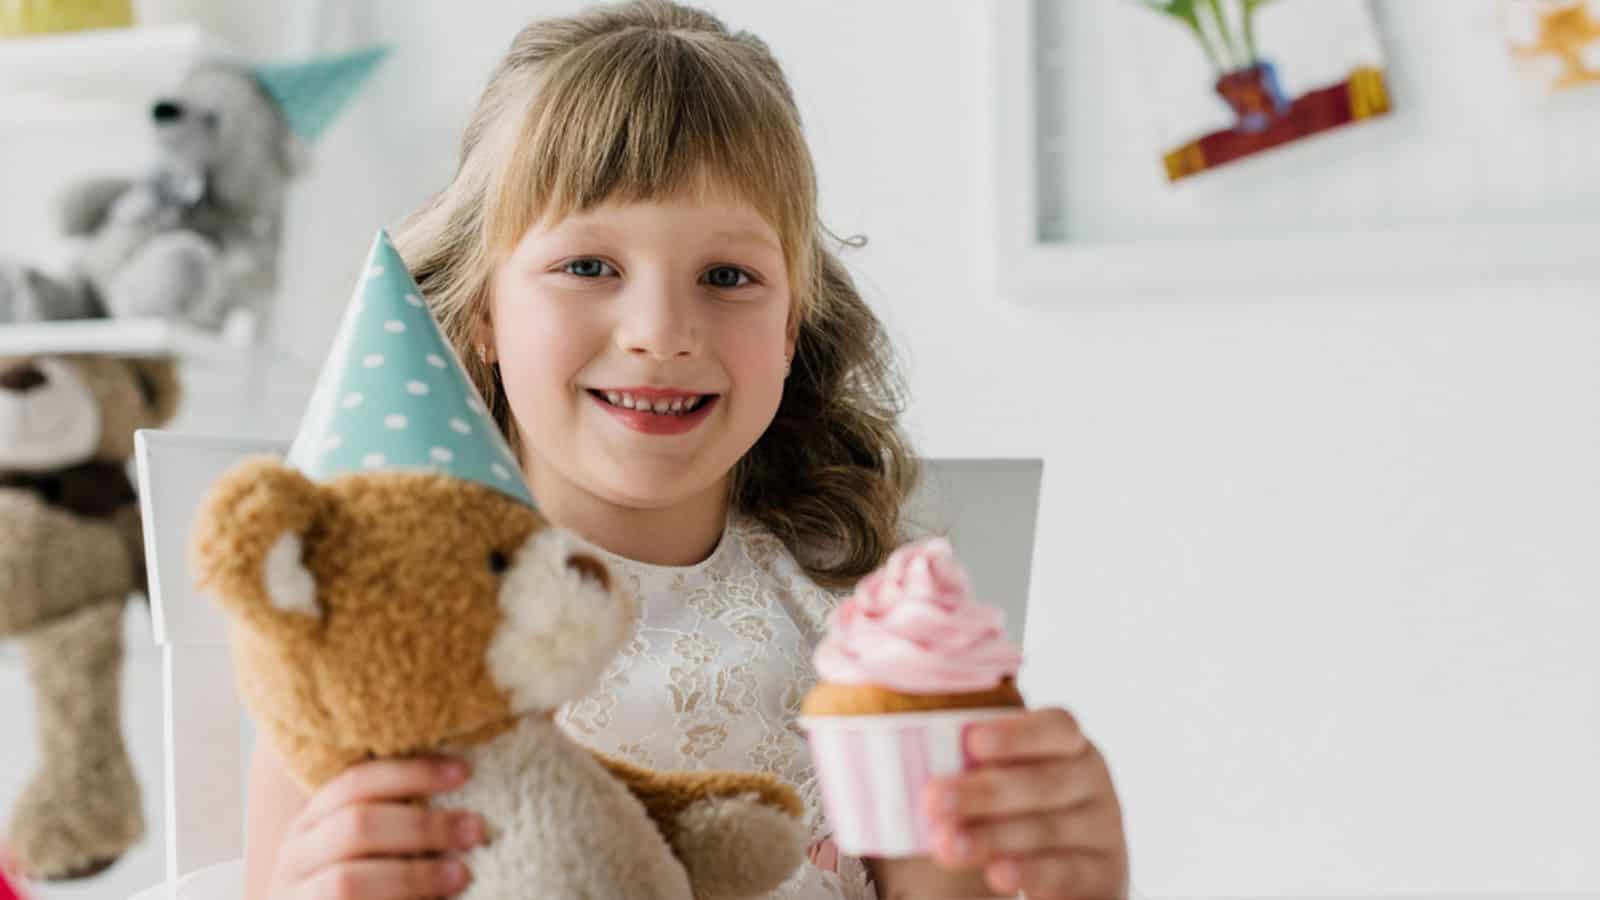 Smiling birthday kid showing cupcake and holding teddy bear